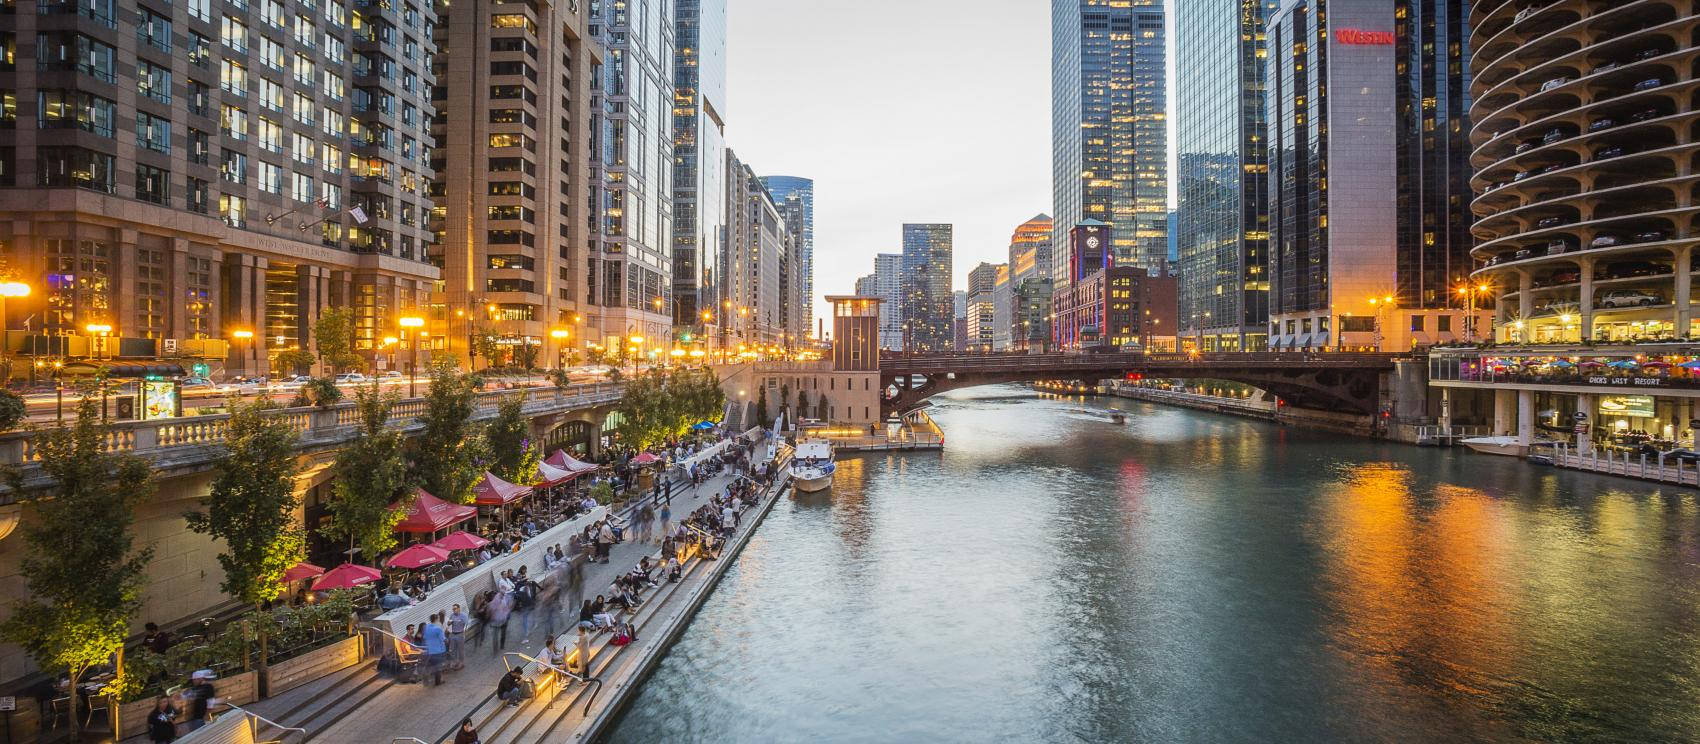 Cafes Near Chicago River In Illinois Wallpaper